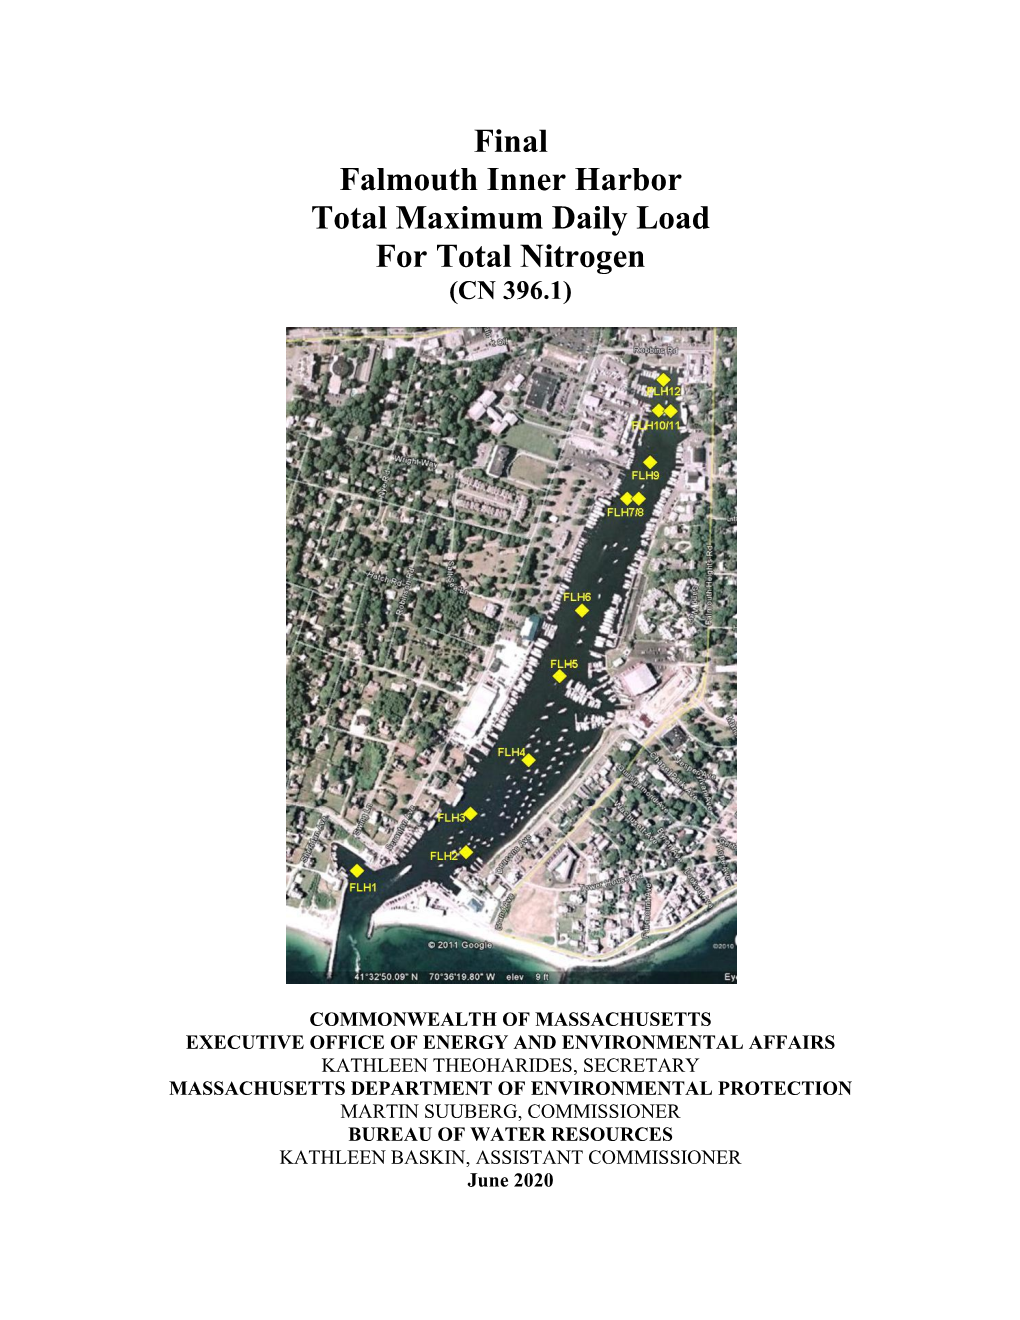 Final Falmouth Inner Harbor Total Maximum Daily Load for Total Nitrogen (CN 396.1)